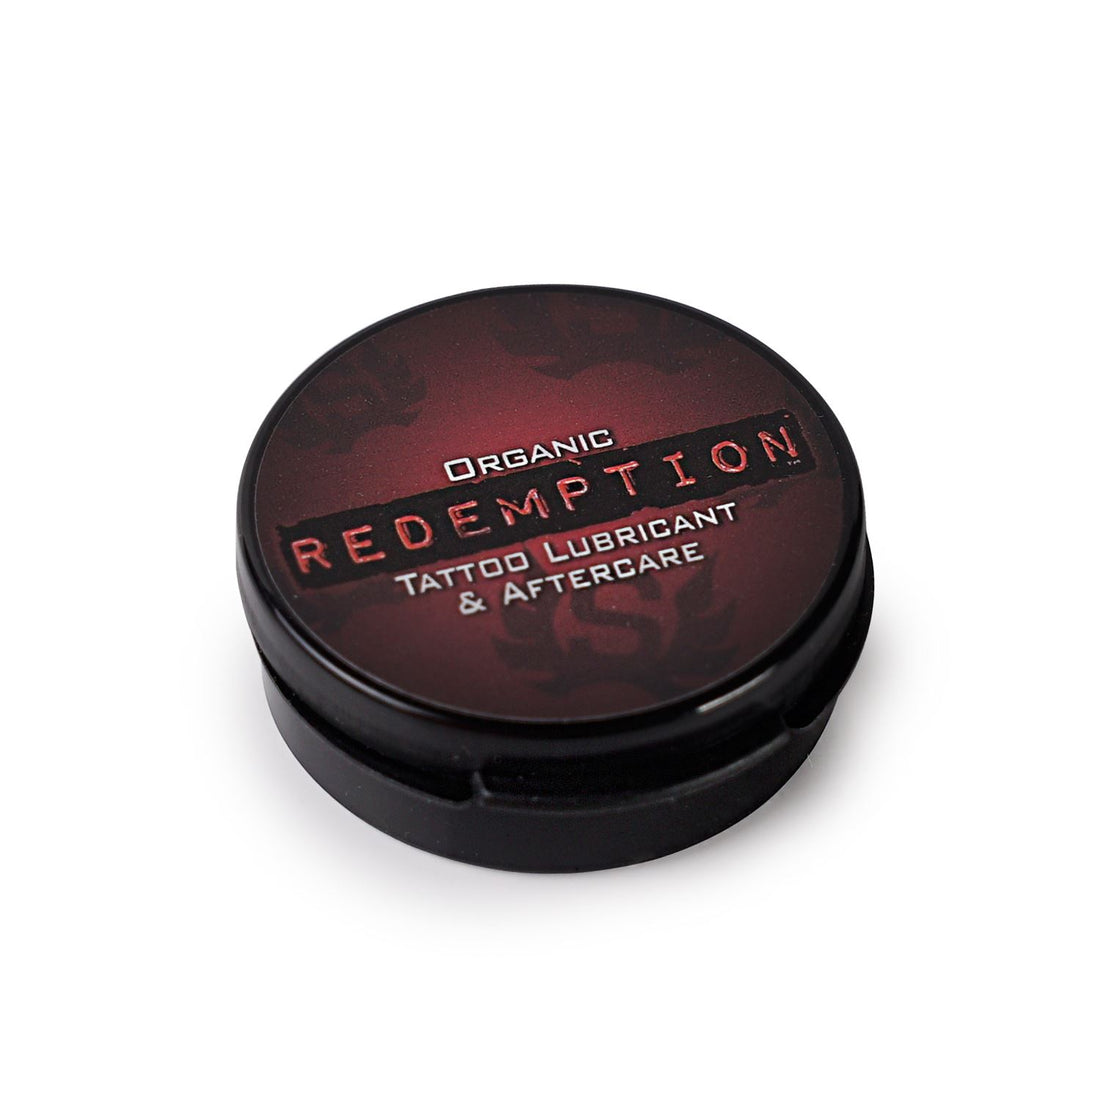 Redemption Tattoo Lubricant and Aftercare